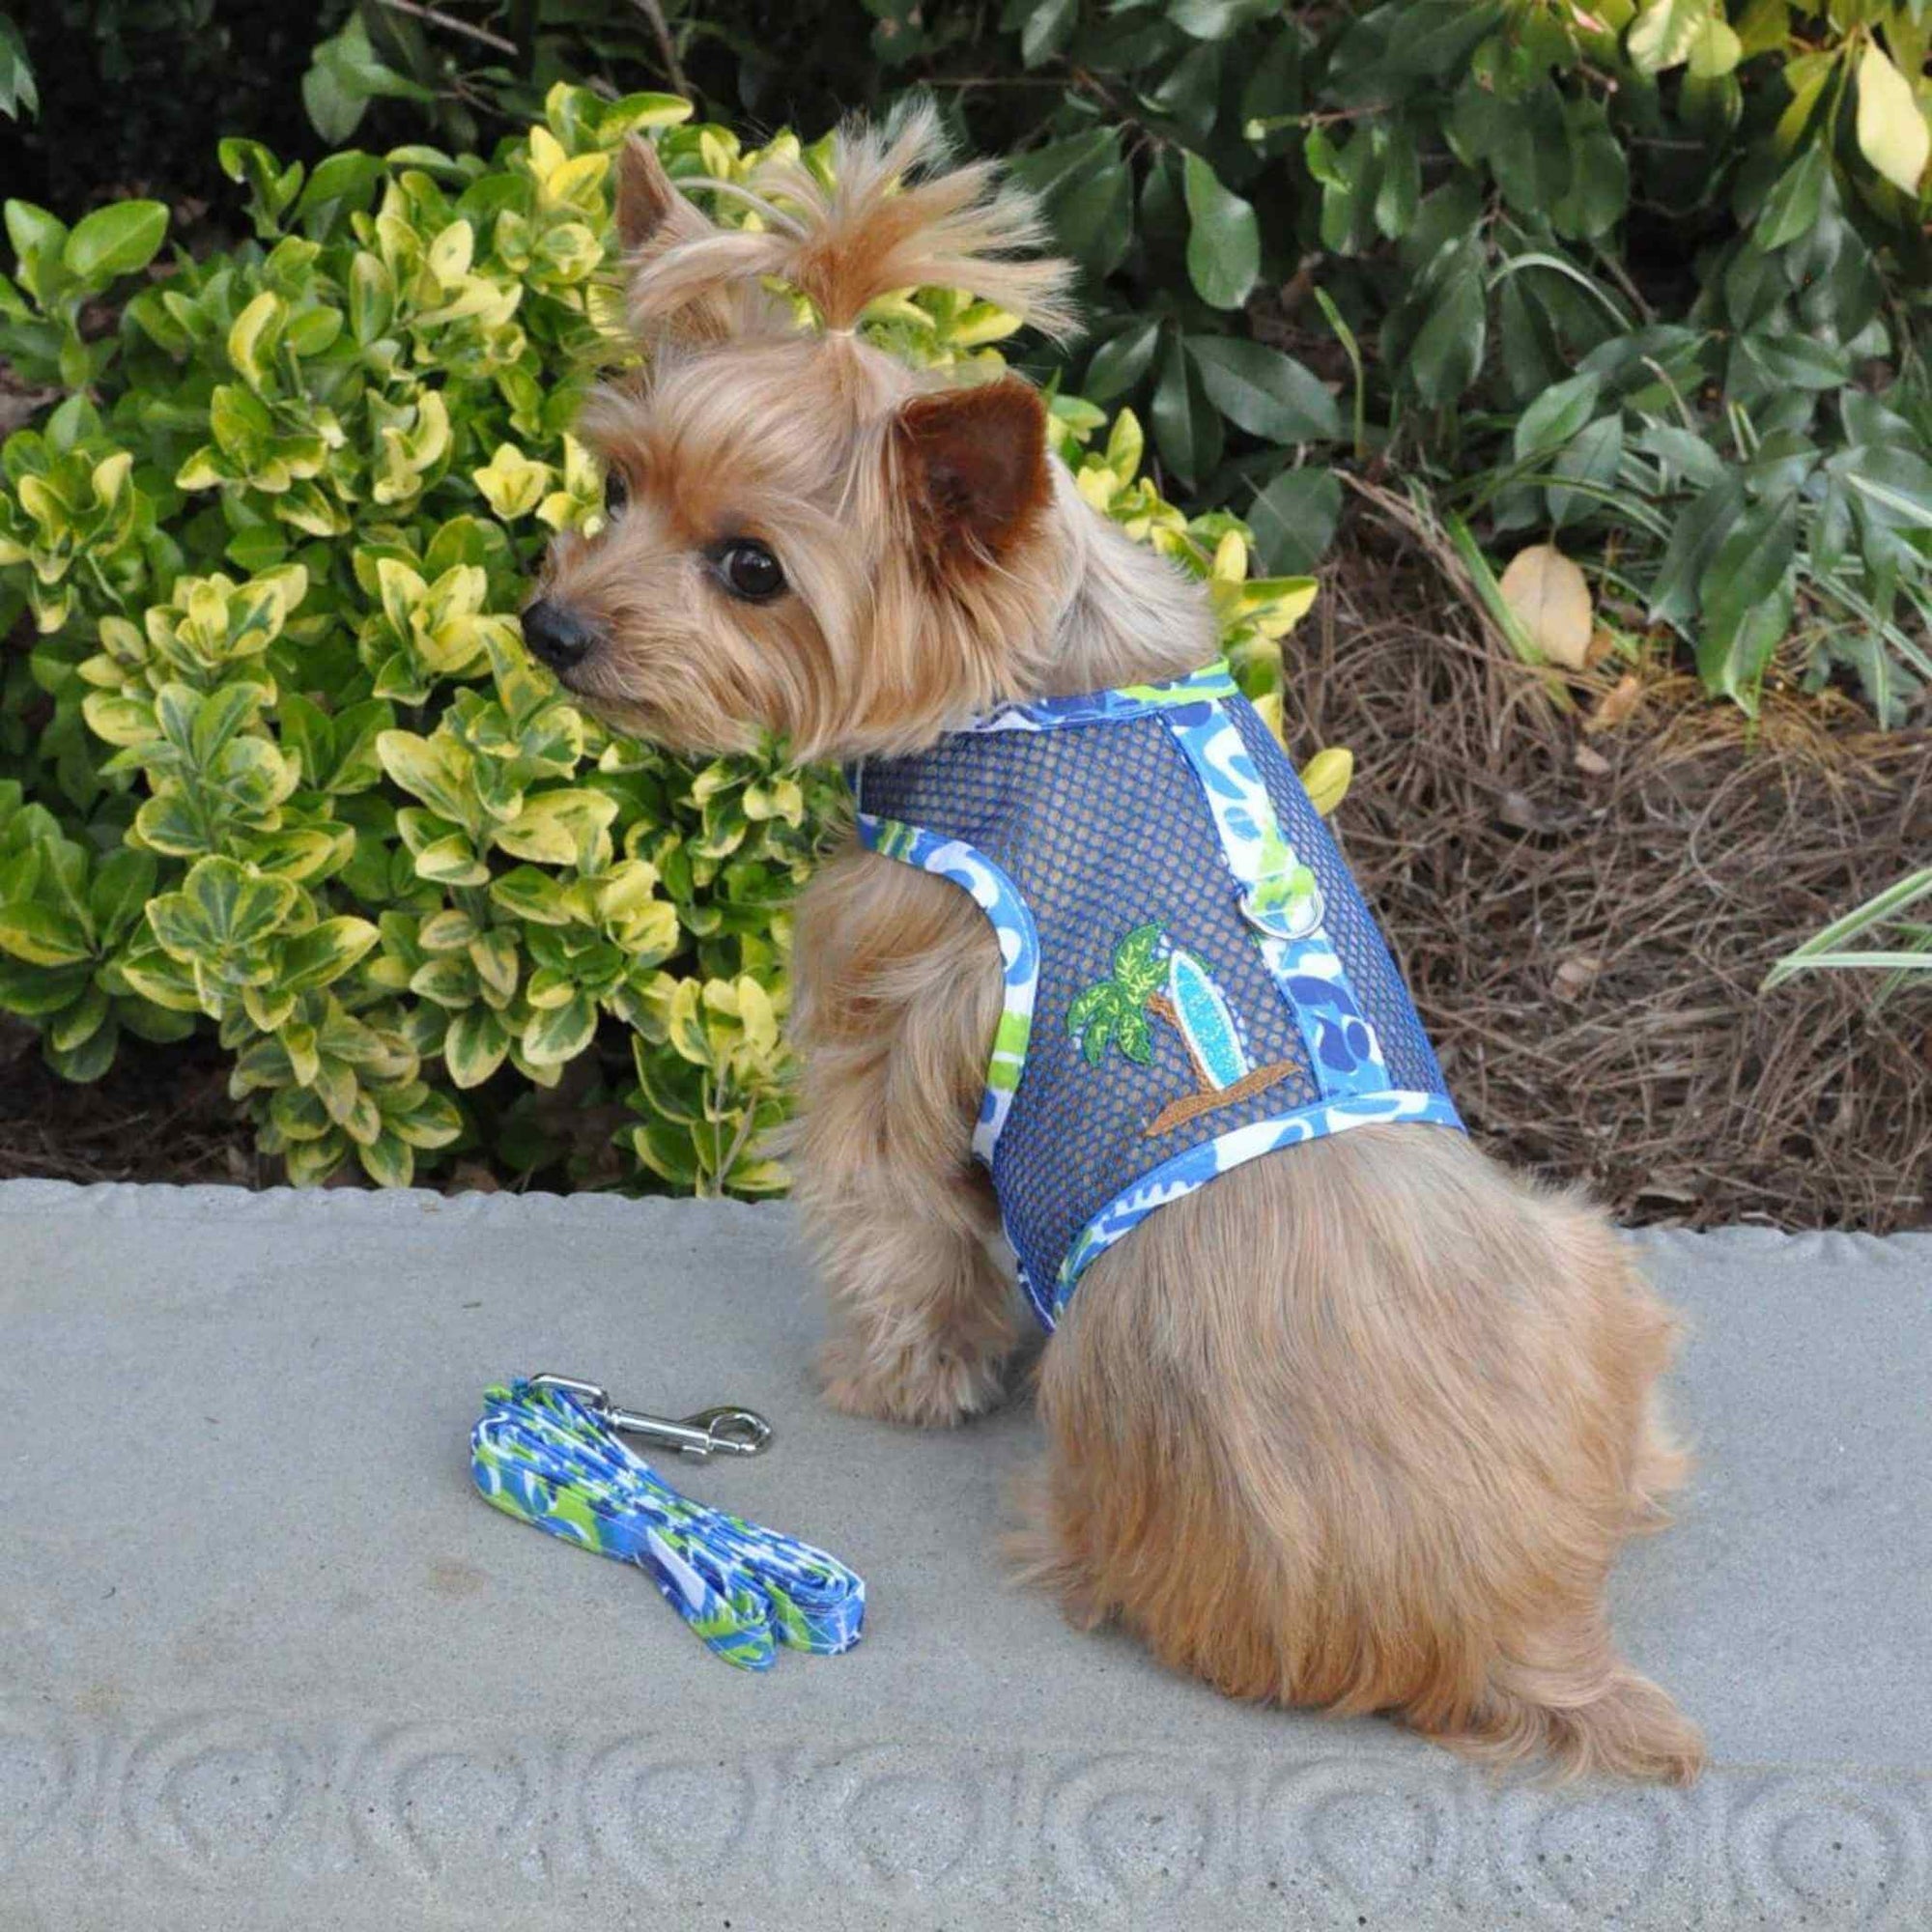 Cool Mesh Dog Harness - Surfboard Blue and Green - on a Yorkie